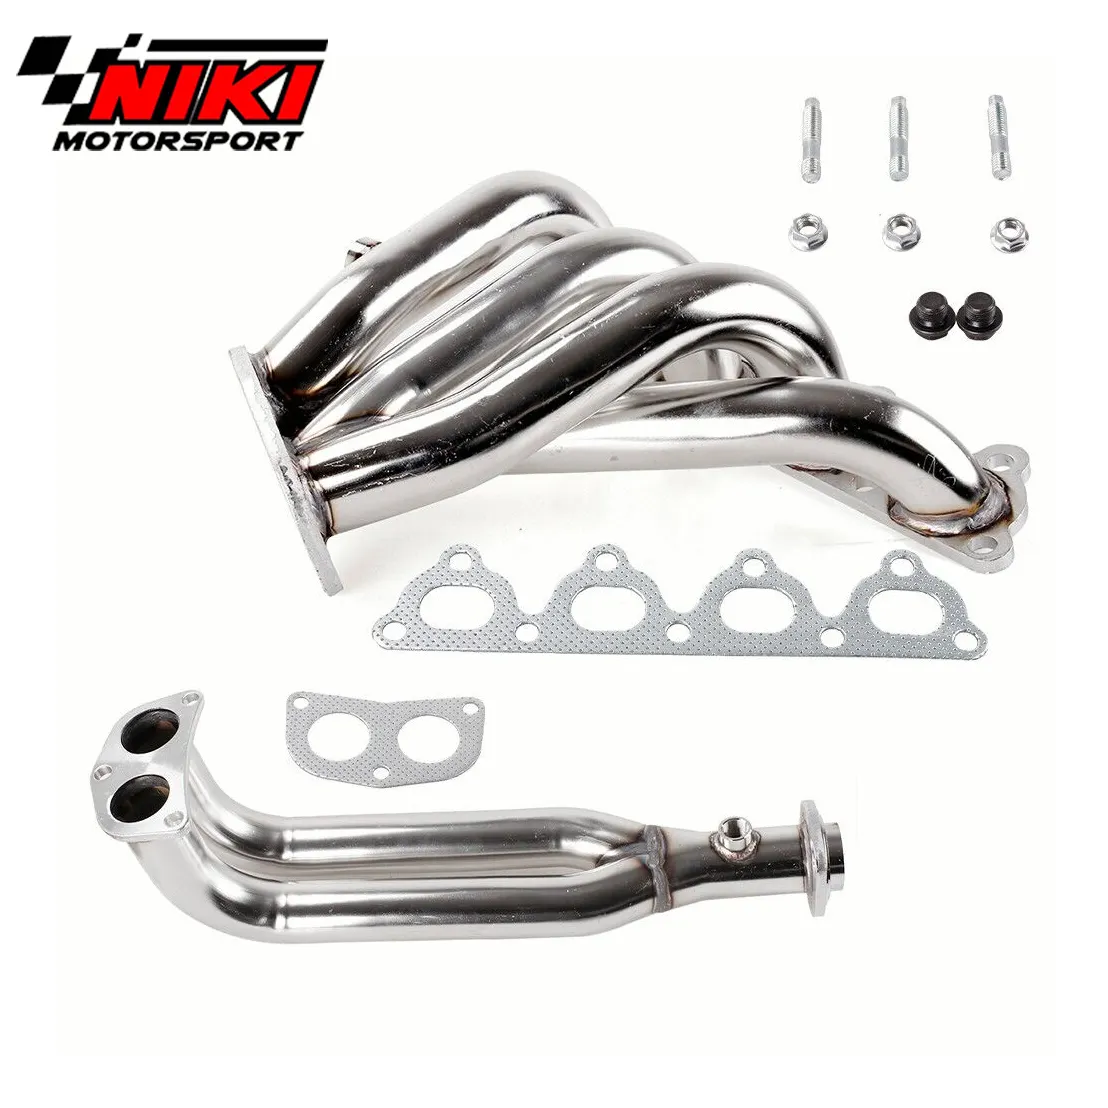 For Honda 1.5L / 1.6L D15/ D16 SOHC l4 engine model Stainless Steel Exhaust Piping Header Exhaust Manifold